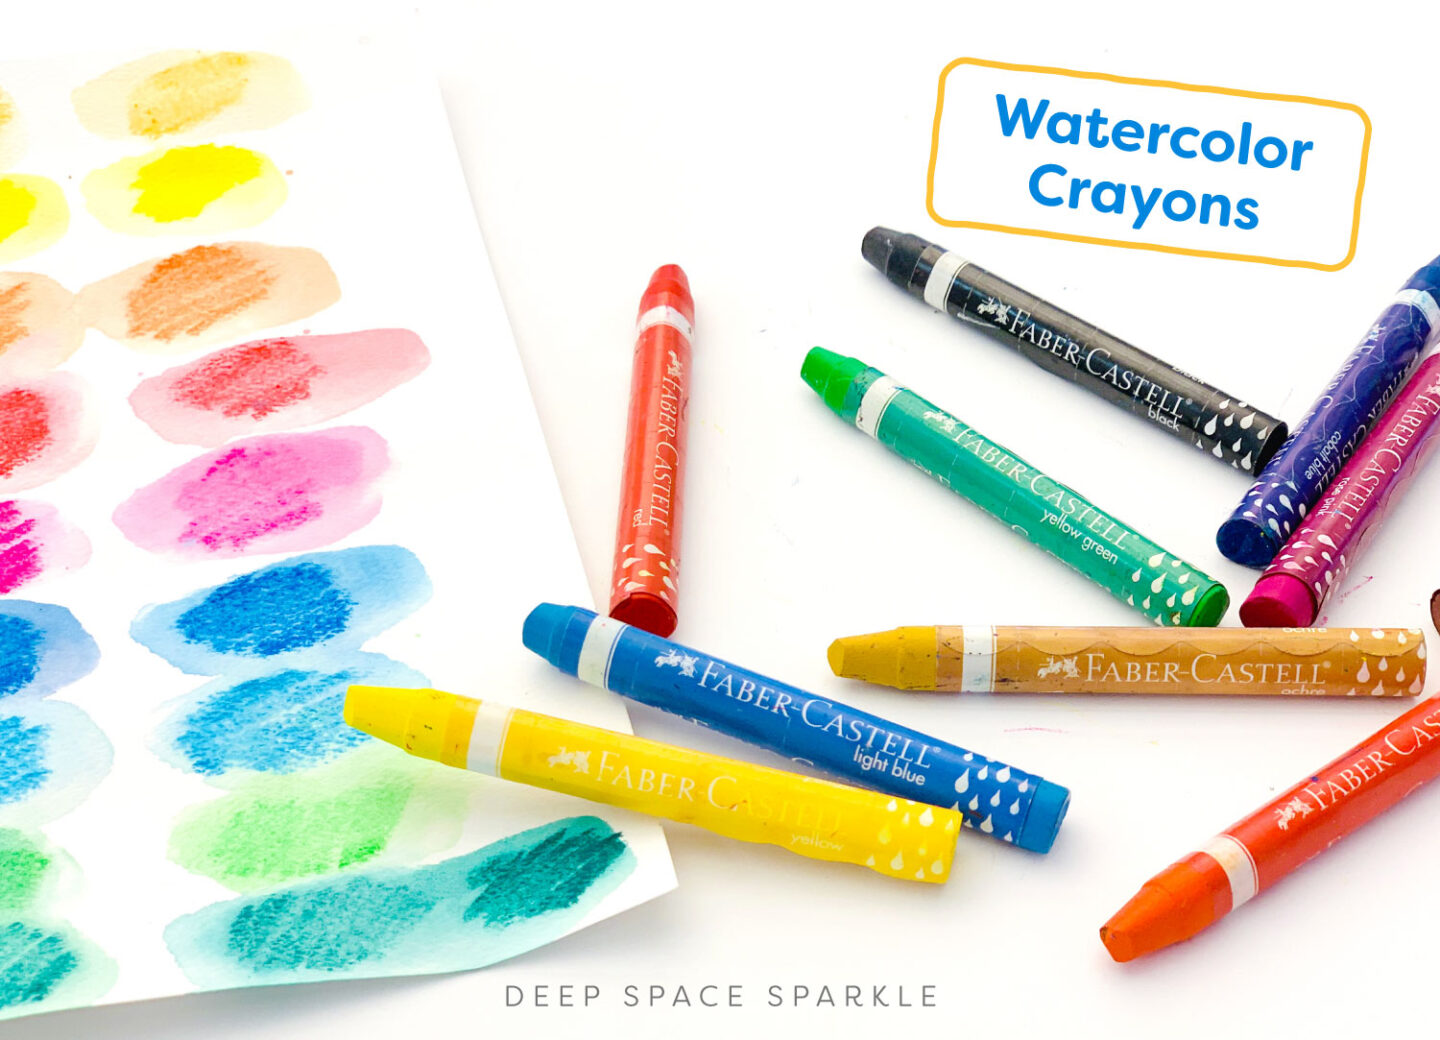 https://www.deepspacesparkle.com/wp-content/uploads/2019/07/Watercolor-Crayons-The-Top-5-Watercolor-Colored-Pencil-and-Crayon-Sets-for-Kids-1-1440x1040.jpg